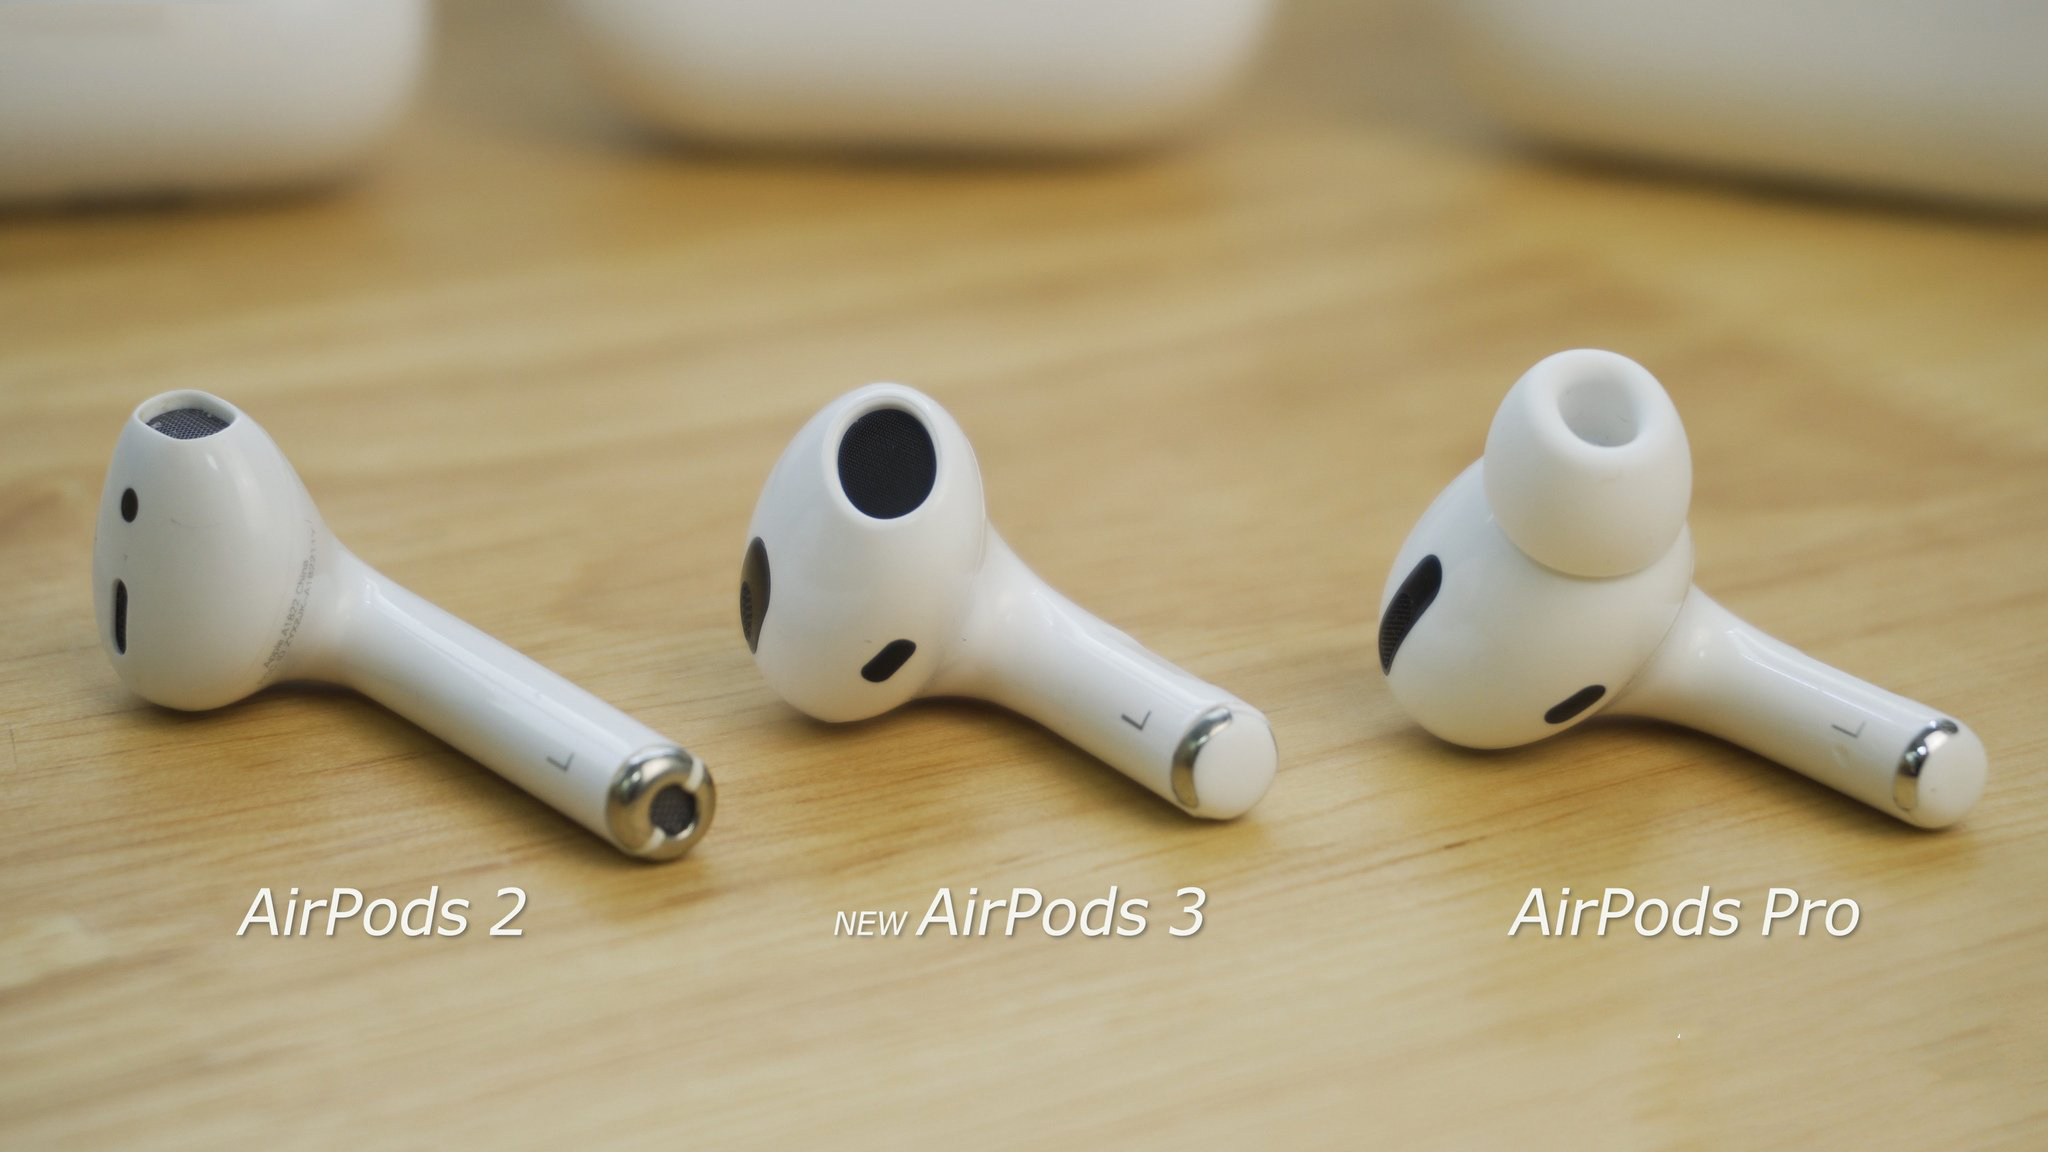 Thiết kế của AirPods 3